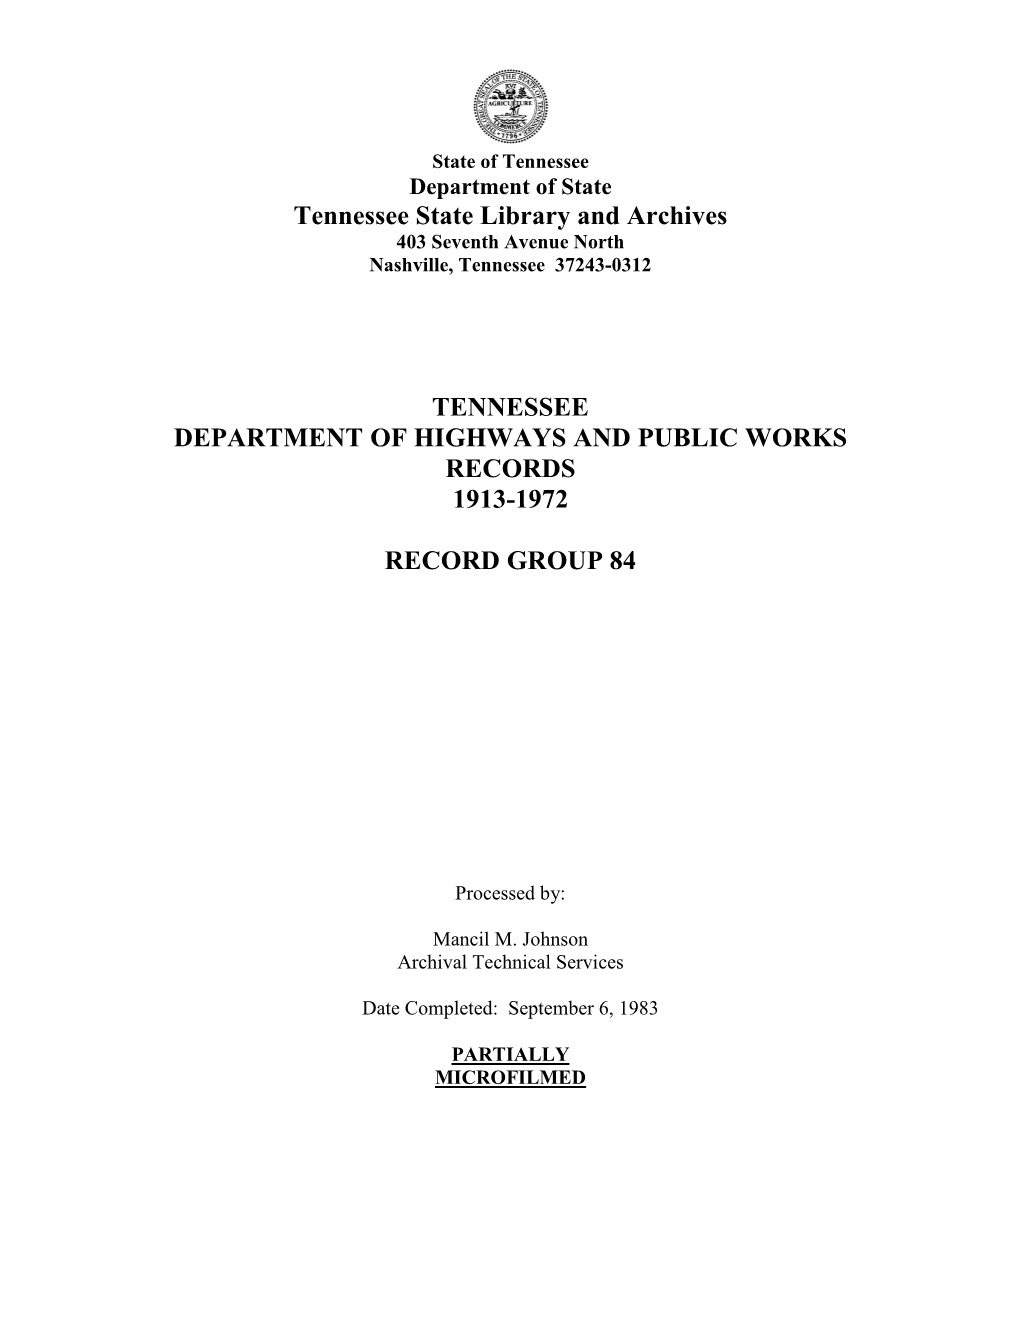 Department of Highways and Public Works Records 1913-1972